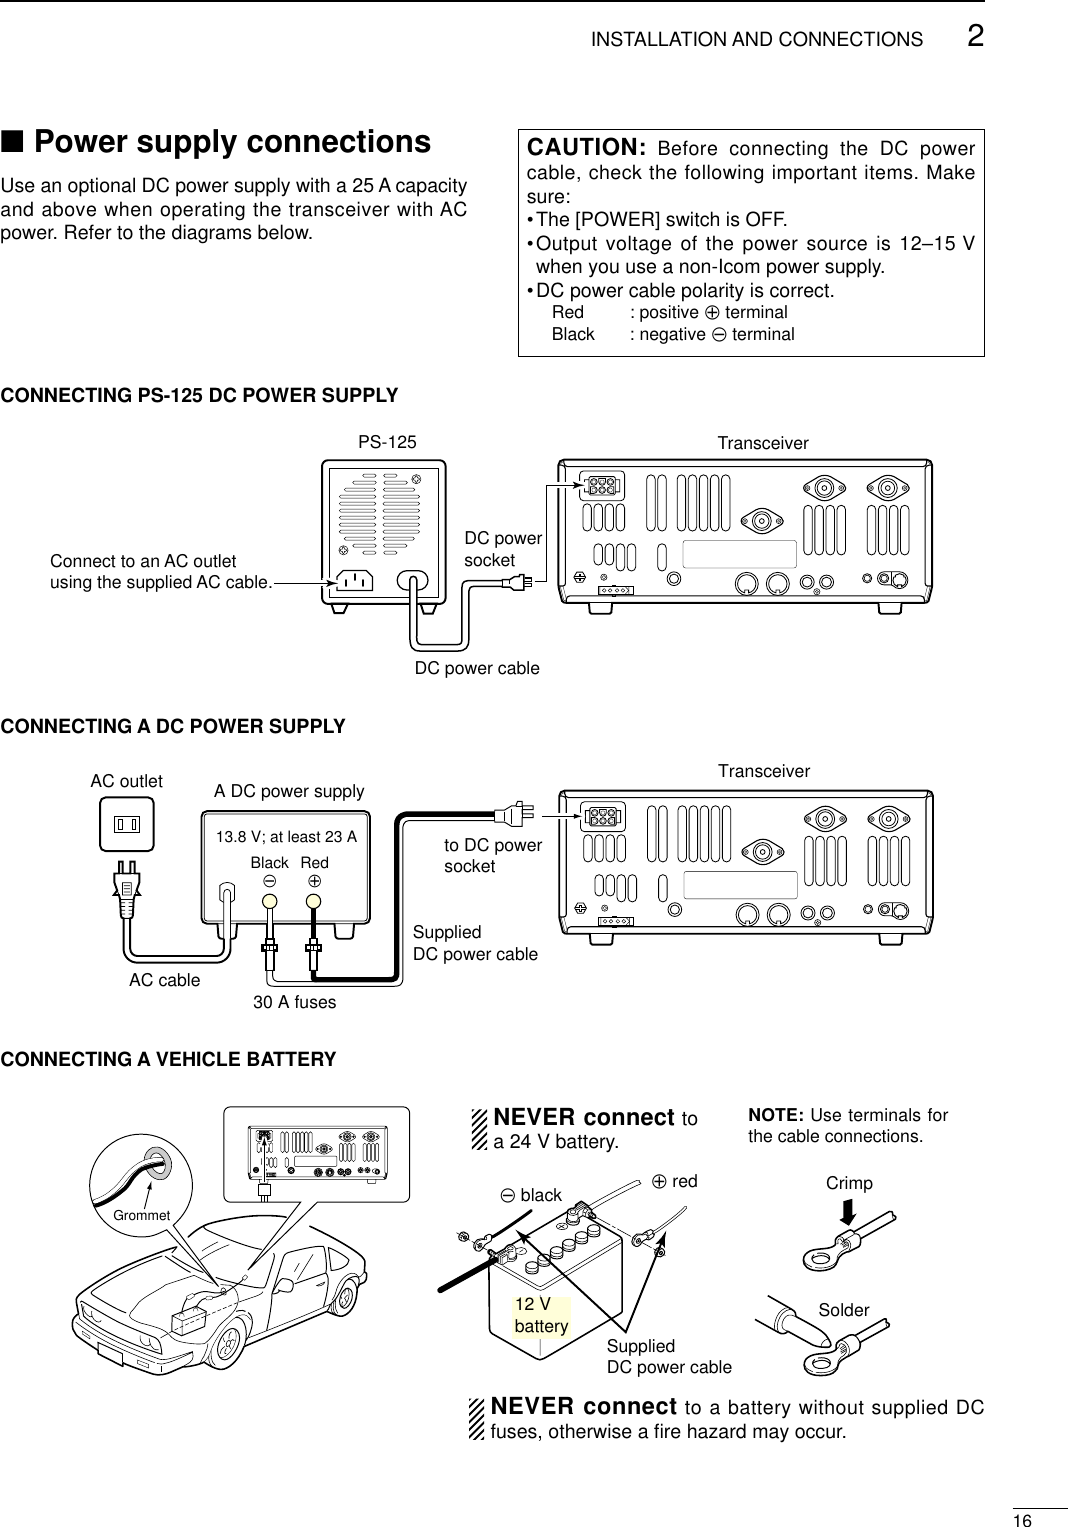 162INSTALLATION AND CONNECTIONS■Power supply connectionsUse an optional DC power supply with a 25 A capacityand above when operating the transceiver with ACpower. Refer to the diagrams below.CONNECTING PS-125 DC POWER SUPPLYCONNECTING A DC POWER SUPPLYCONNECTING A VEHICLE BATTERY30 A fusesAC cableTransceiverAC outlet A DC power supply13.8 V; at least 23 ABlack_Red+to DC powersocketSuppliedDC power cable12 Vbattery SuppliedDC power cable+ red_ black CrimpSolderGrommetNEVER connect toa 24 V battery.NOTE: Use terminals forthe cable connections.NEVER connect to a battery without supplied DCfuses, otherwise a ﬁre hazard may occur.PS-125Connect to an AC outletusing the supplied AC cable.DC power cableDC powersocketTransceiverCAUTION: Before connecting the DC powercable, check the following important items. Makesure:•The [POWER] switch is OFF.•Output voltage of the power source is 12–15 Vwhen you use a non-Icom power supply.•DC power cable polarity is correct.Red : positive +terminalBlack : negative _terminal